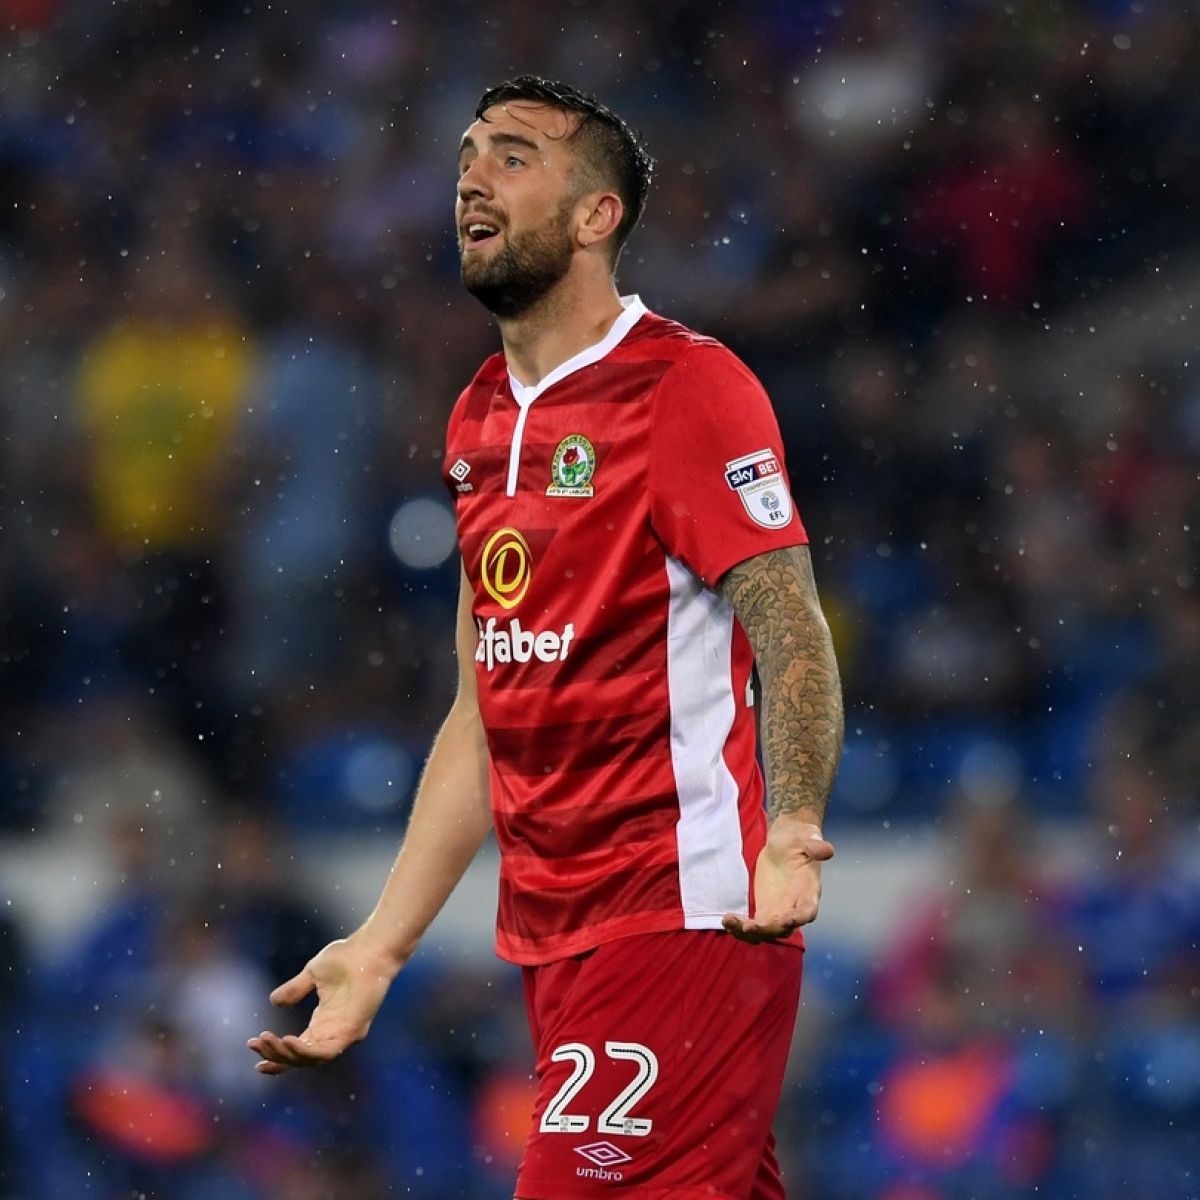 Shane Duffy has a night to forget two and red